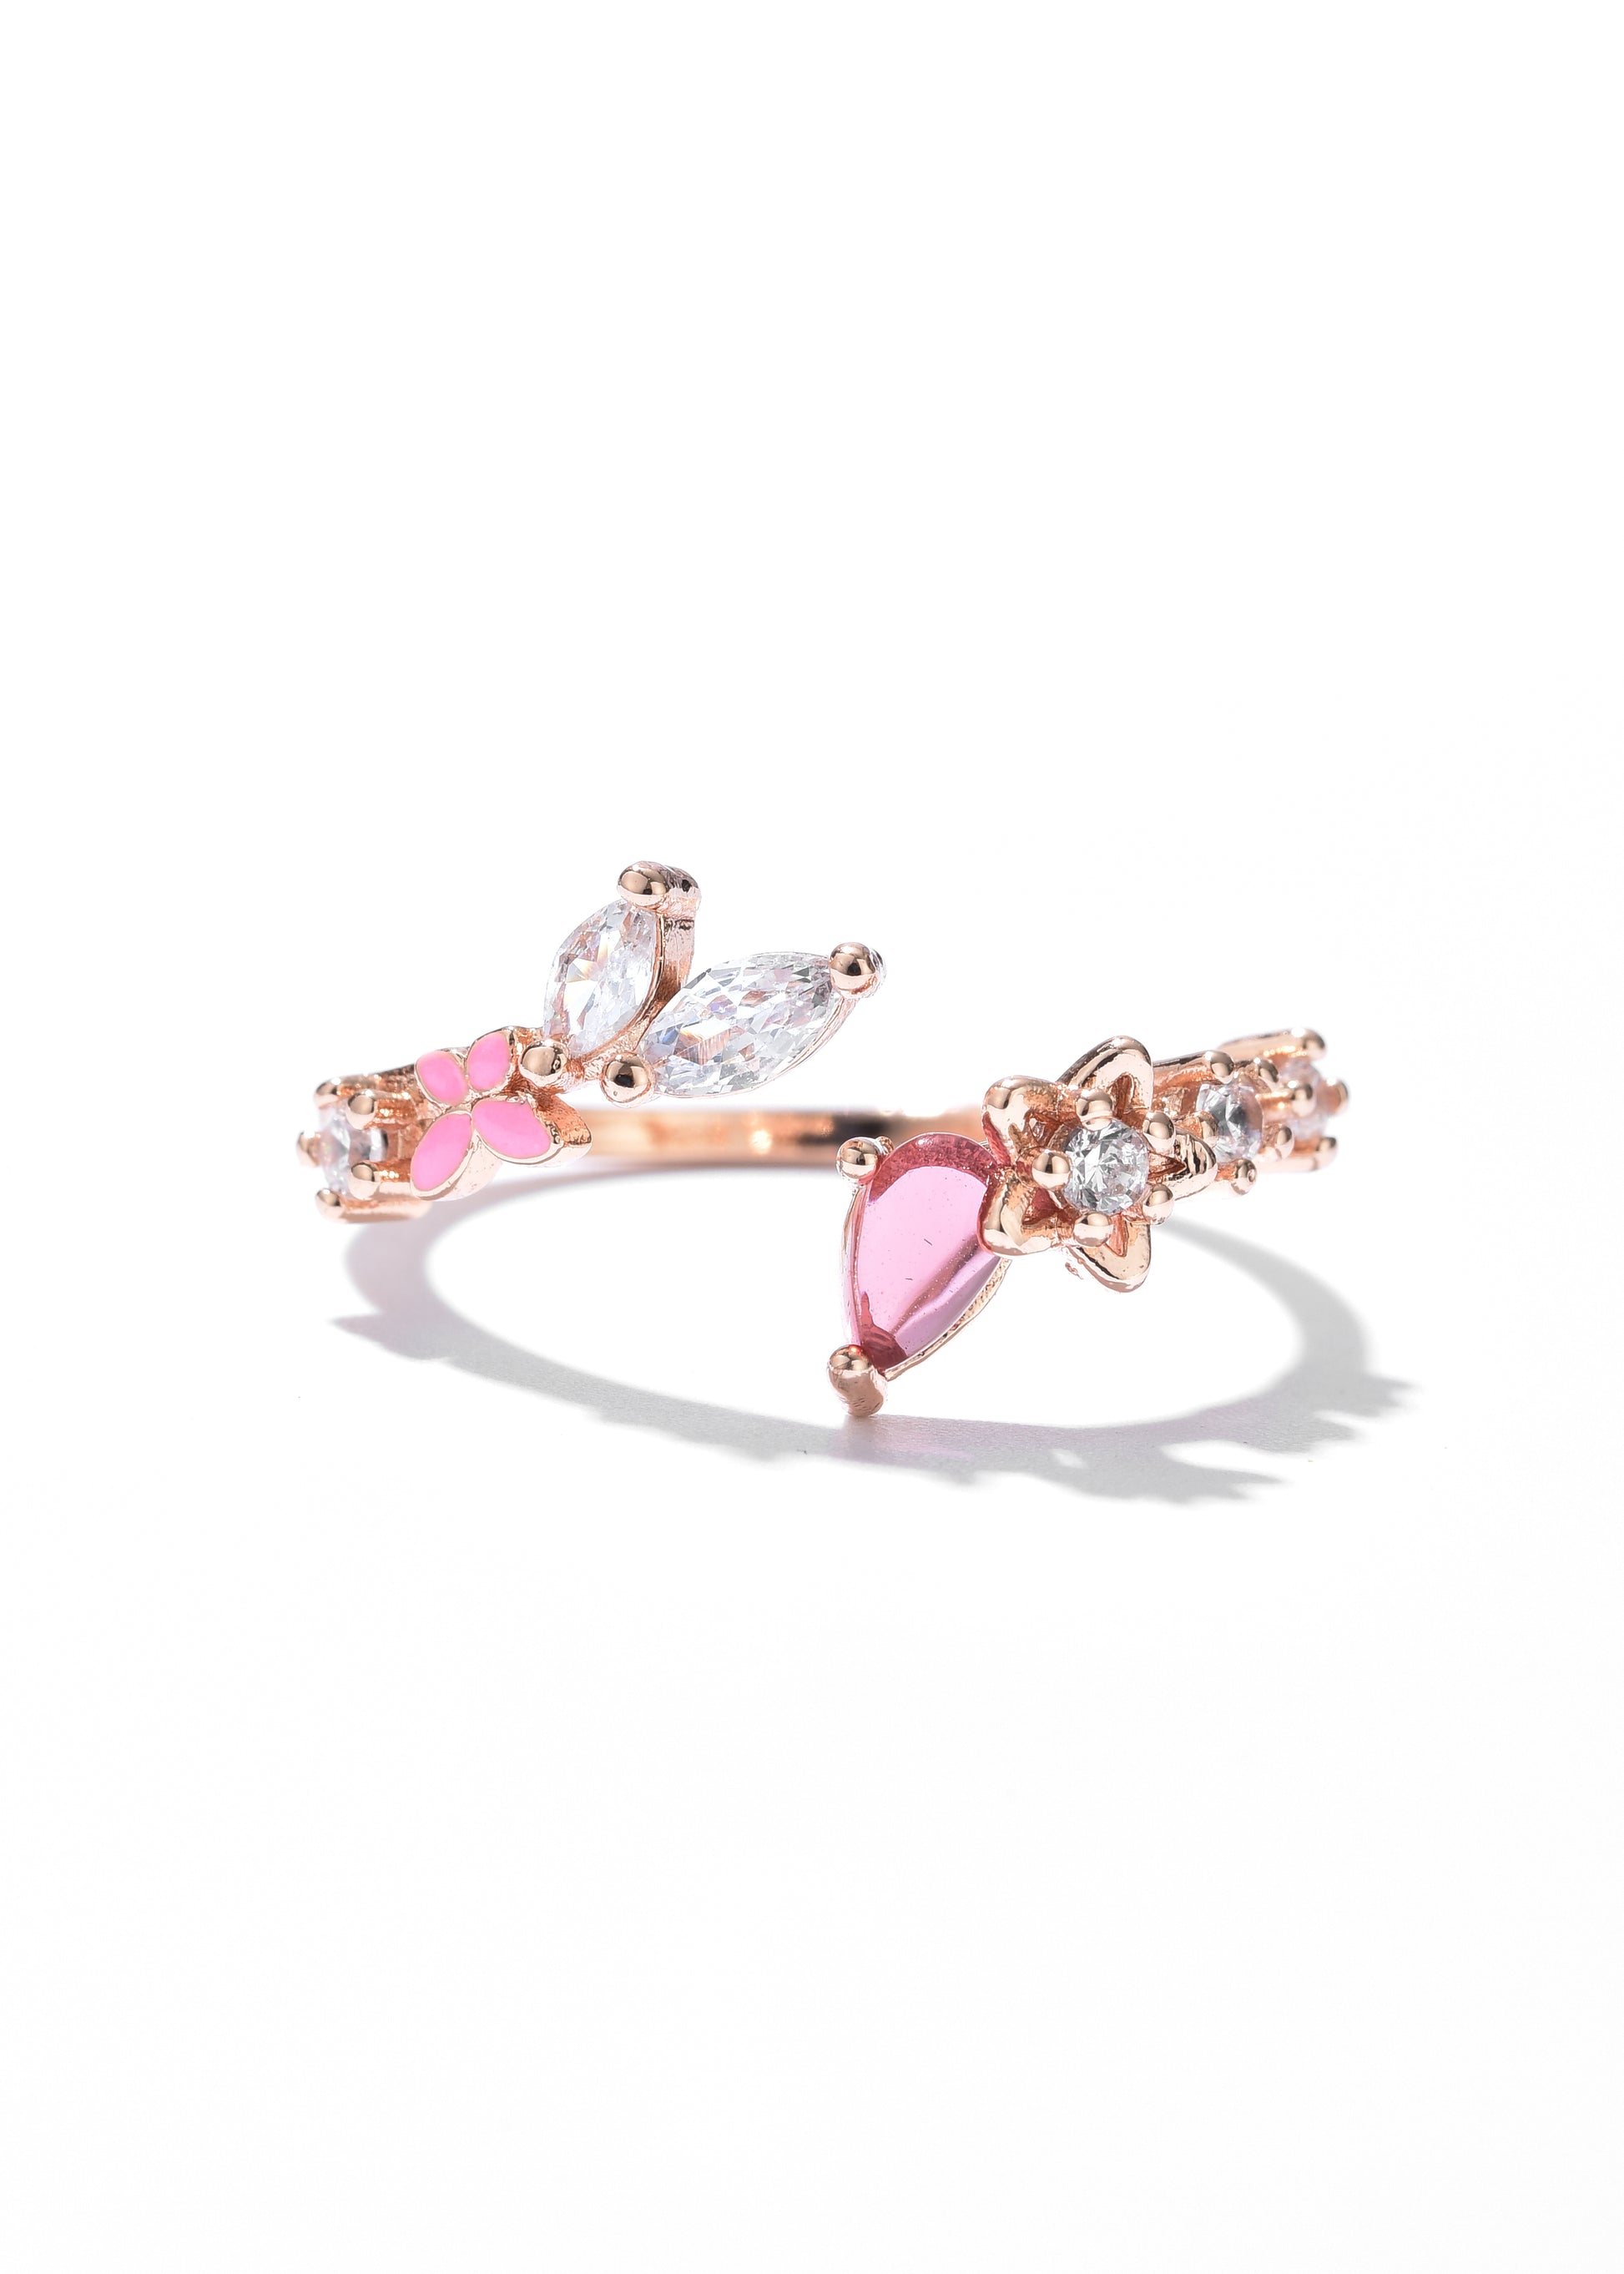 A flower ring with a butterfly design in mid-flight, adorned with pink and clear crystal set along the ring's band.